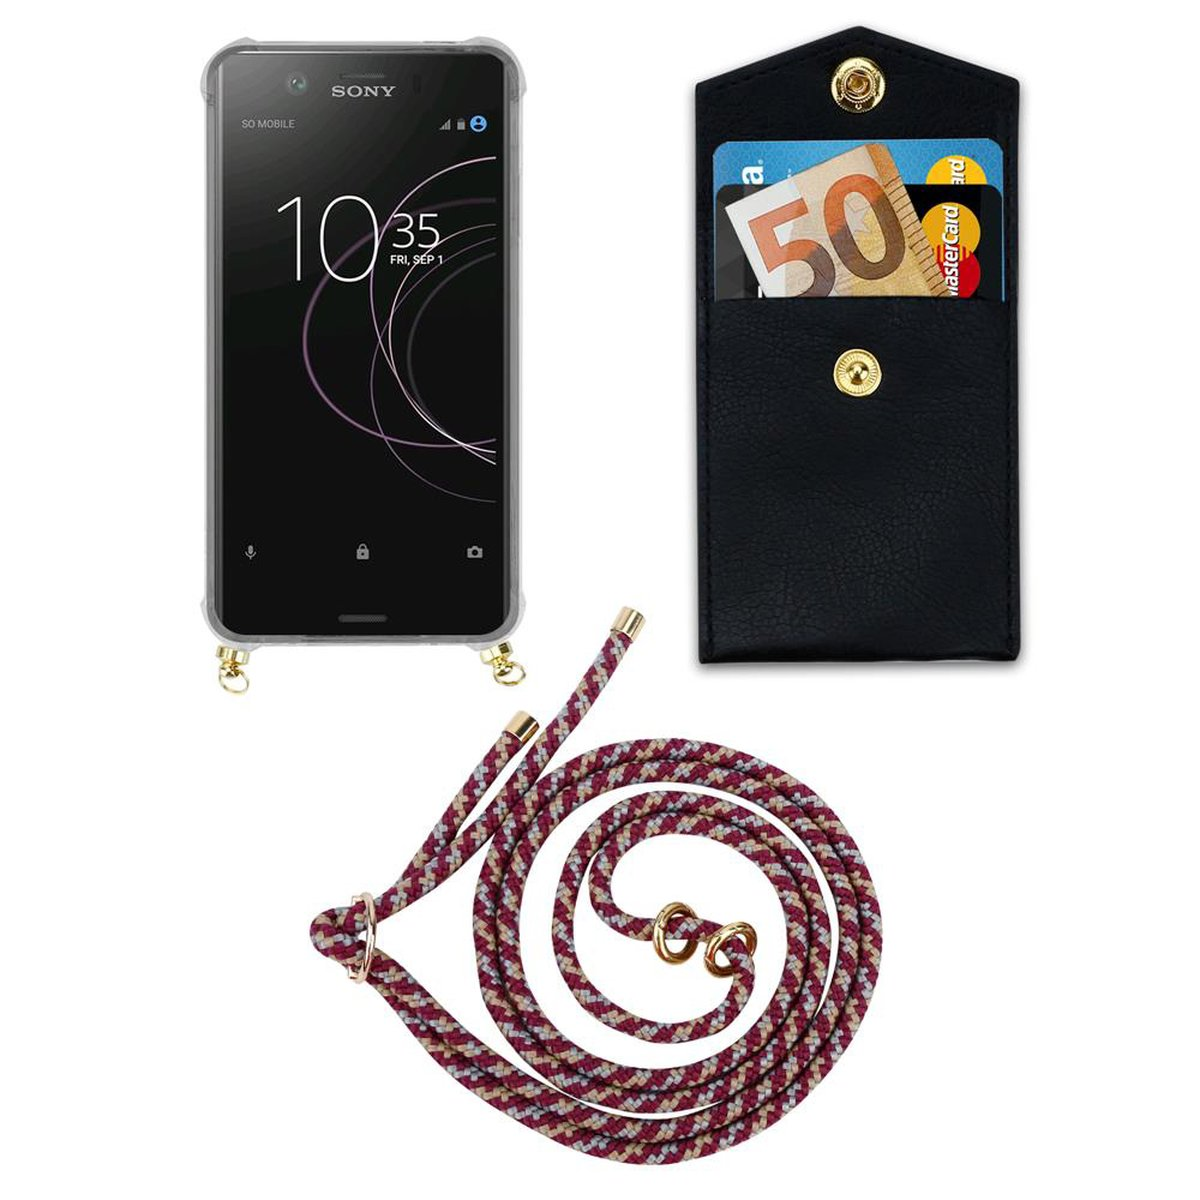 Xperia Hülle, und WEIß CADORABO GELB Backcover, Kordel abnehmbarer mit Ringen, Band ROT Handy Sony, Kette Gold XZ1,